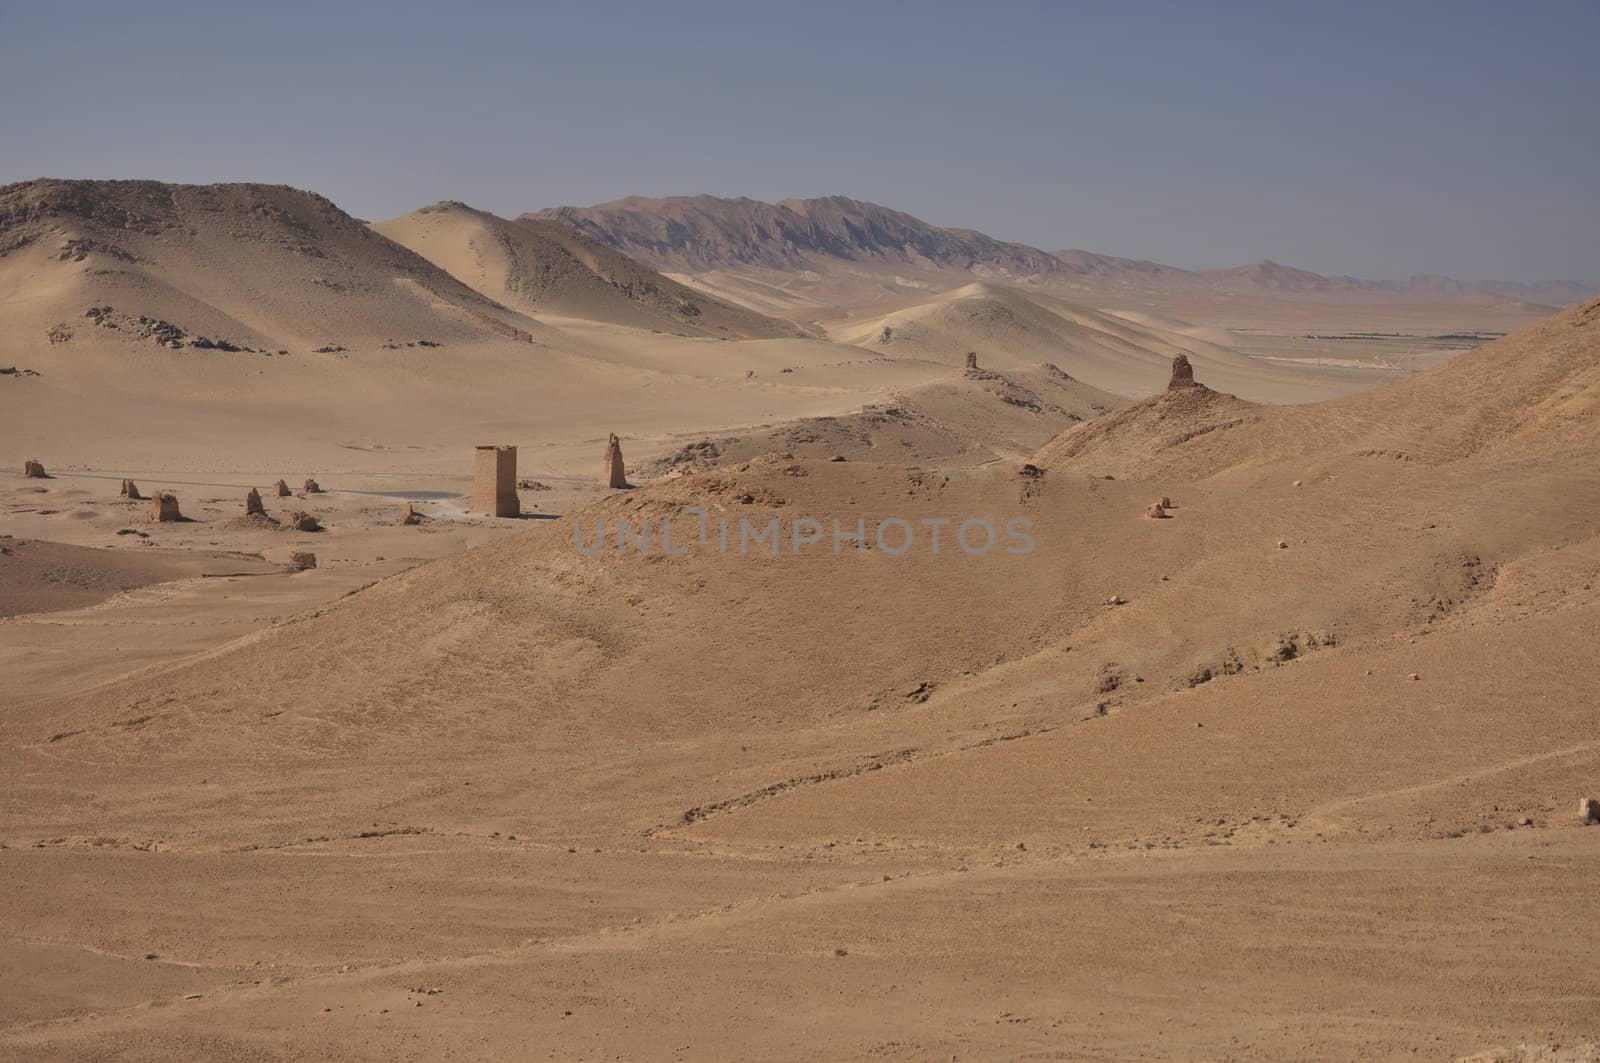 Though the ancient site fell into disuse after the 16th century, it is still known as Tadmor in Arabic. Palmyra is completely in middle of nowhere - lost in death syrian desert.